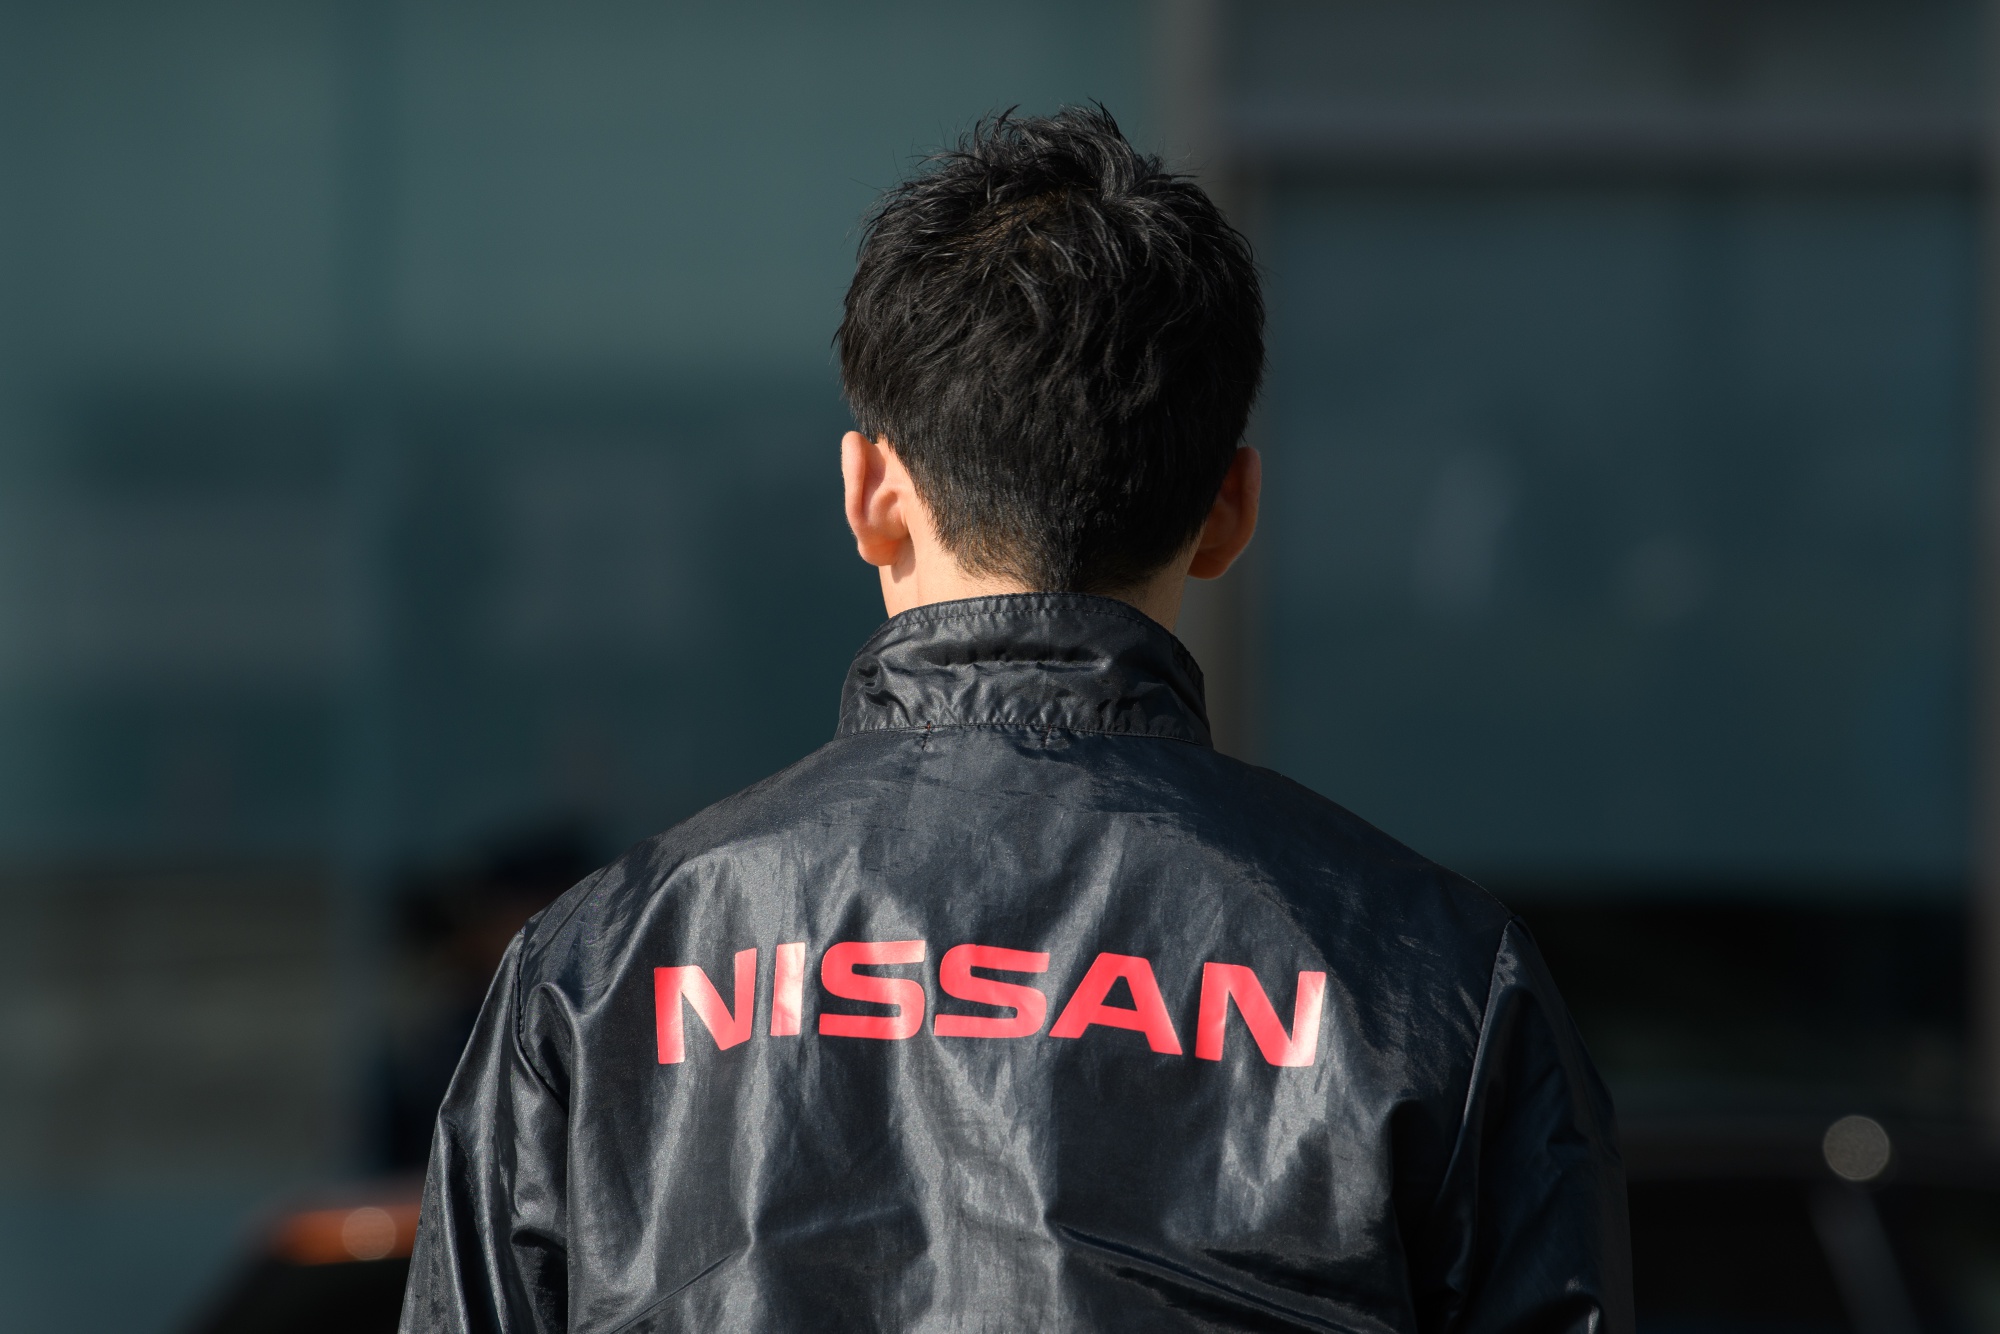 Nissan, Renault and Mitsubishi Motors Heads Hold News Conference as Ghosn Seeks to Regain Clout